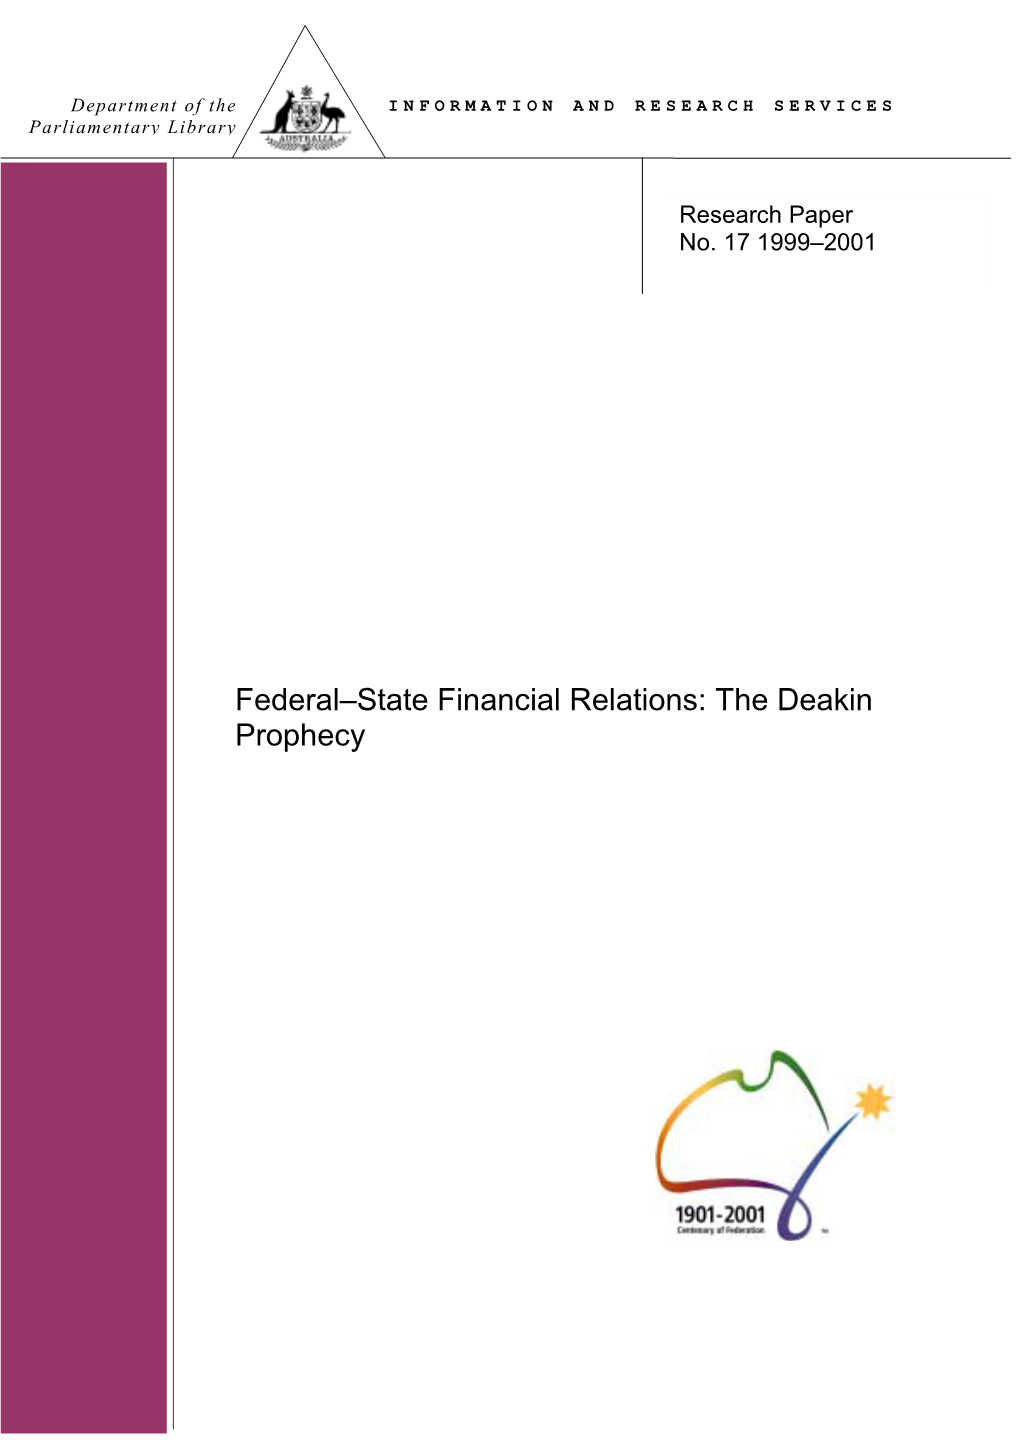 Federal-State Financial Relations: the Deakin Prophecy